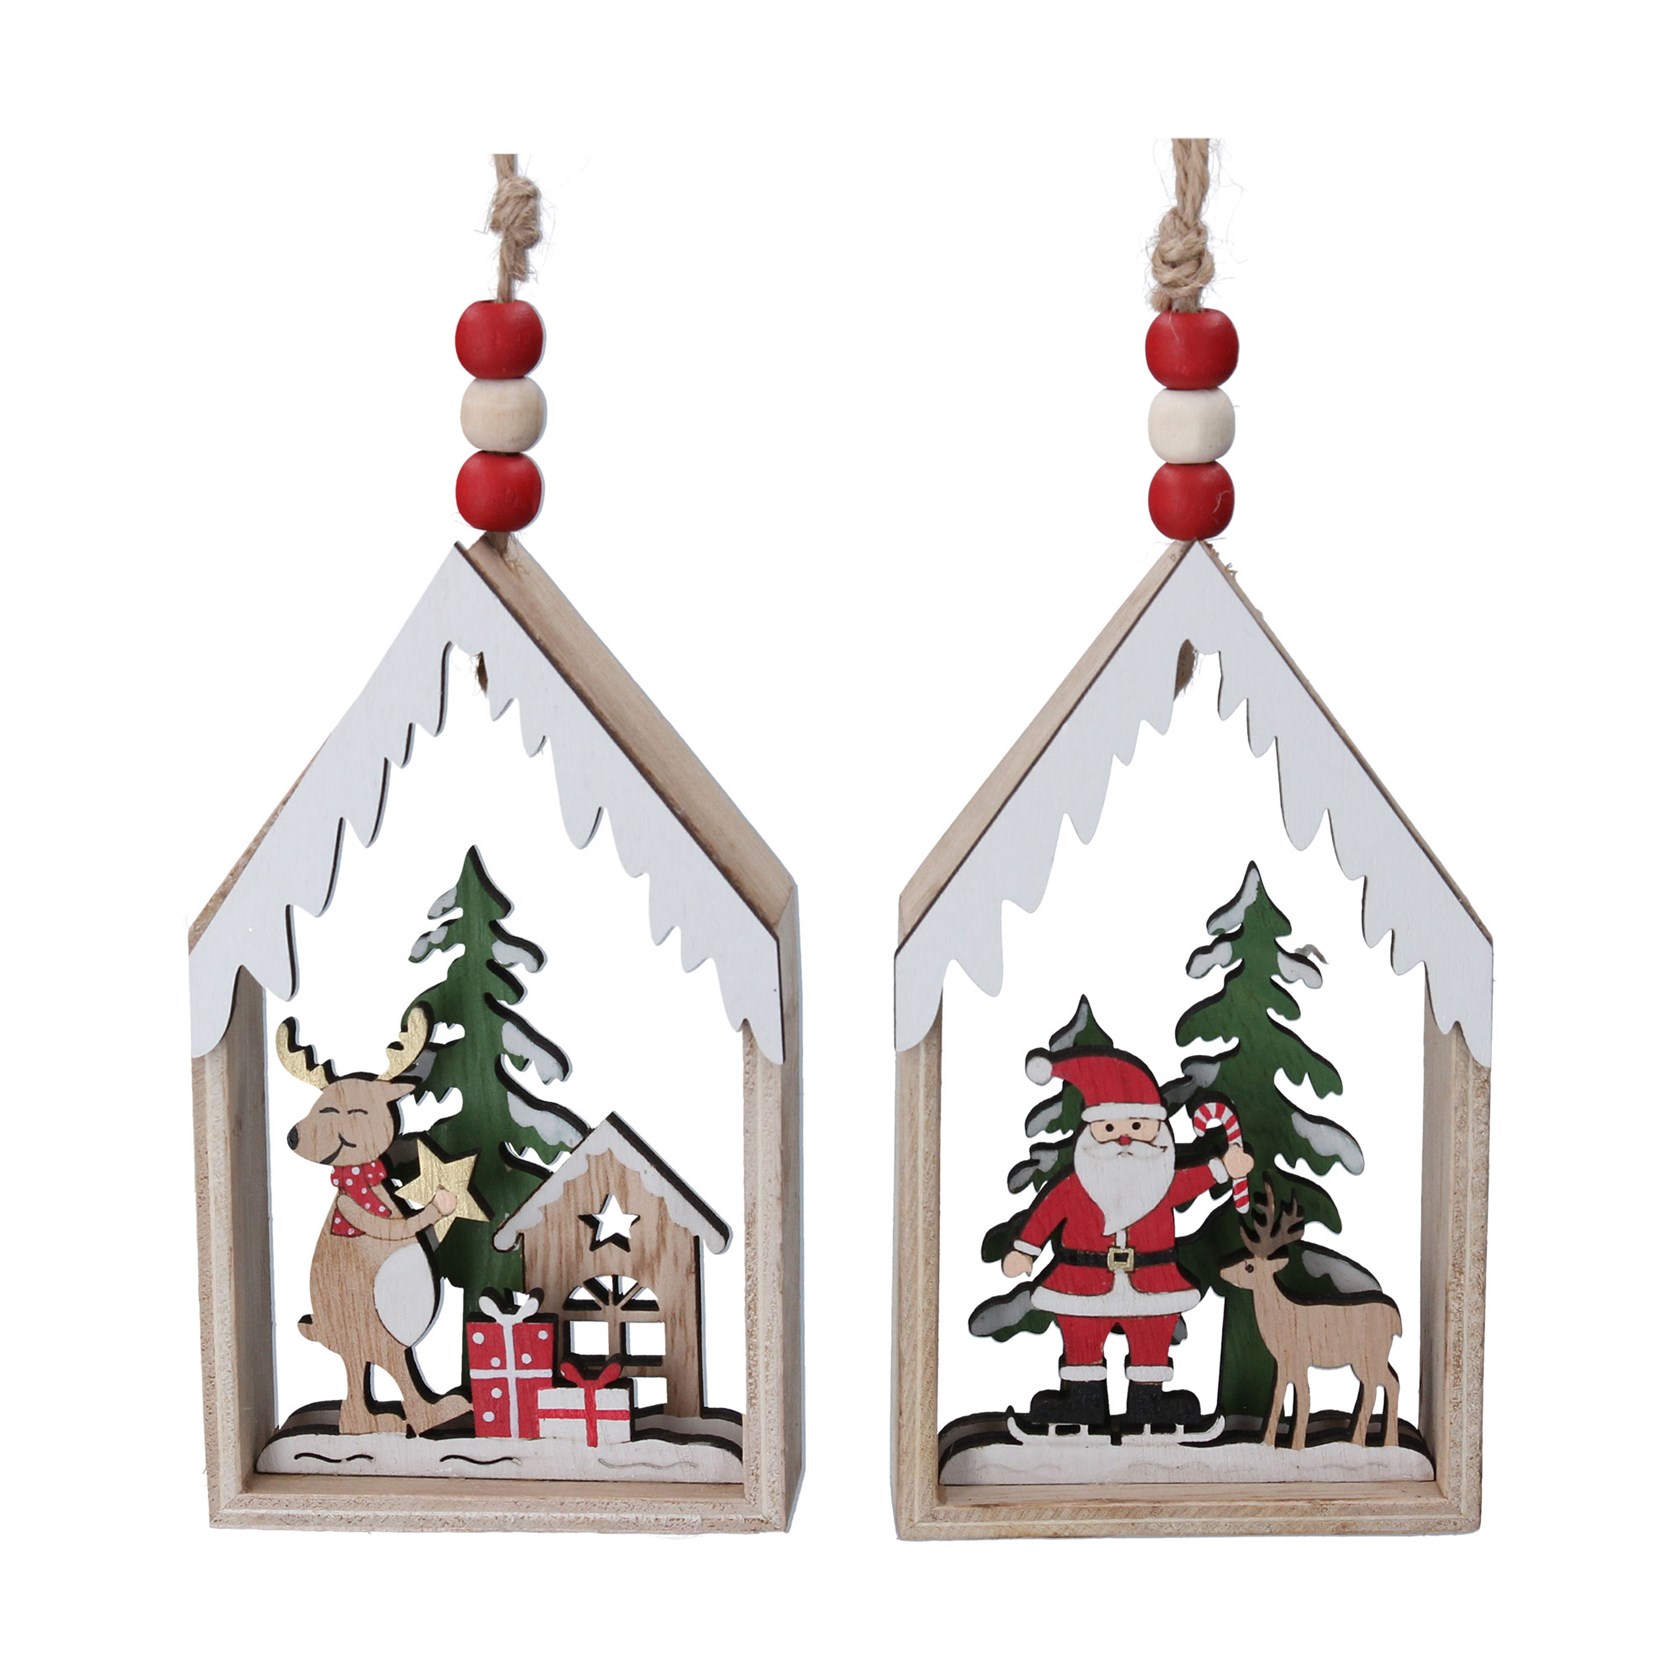 Wooden painted fretwork deer and santa house hanging Christmas decoration. By Gisela Graham. The perfect festive addition to your home.